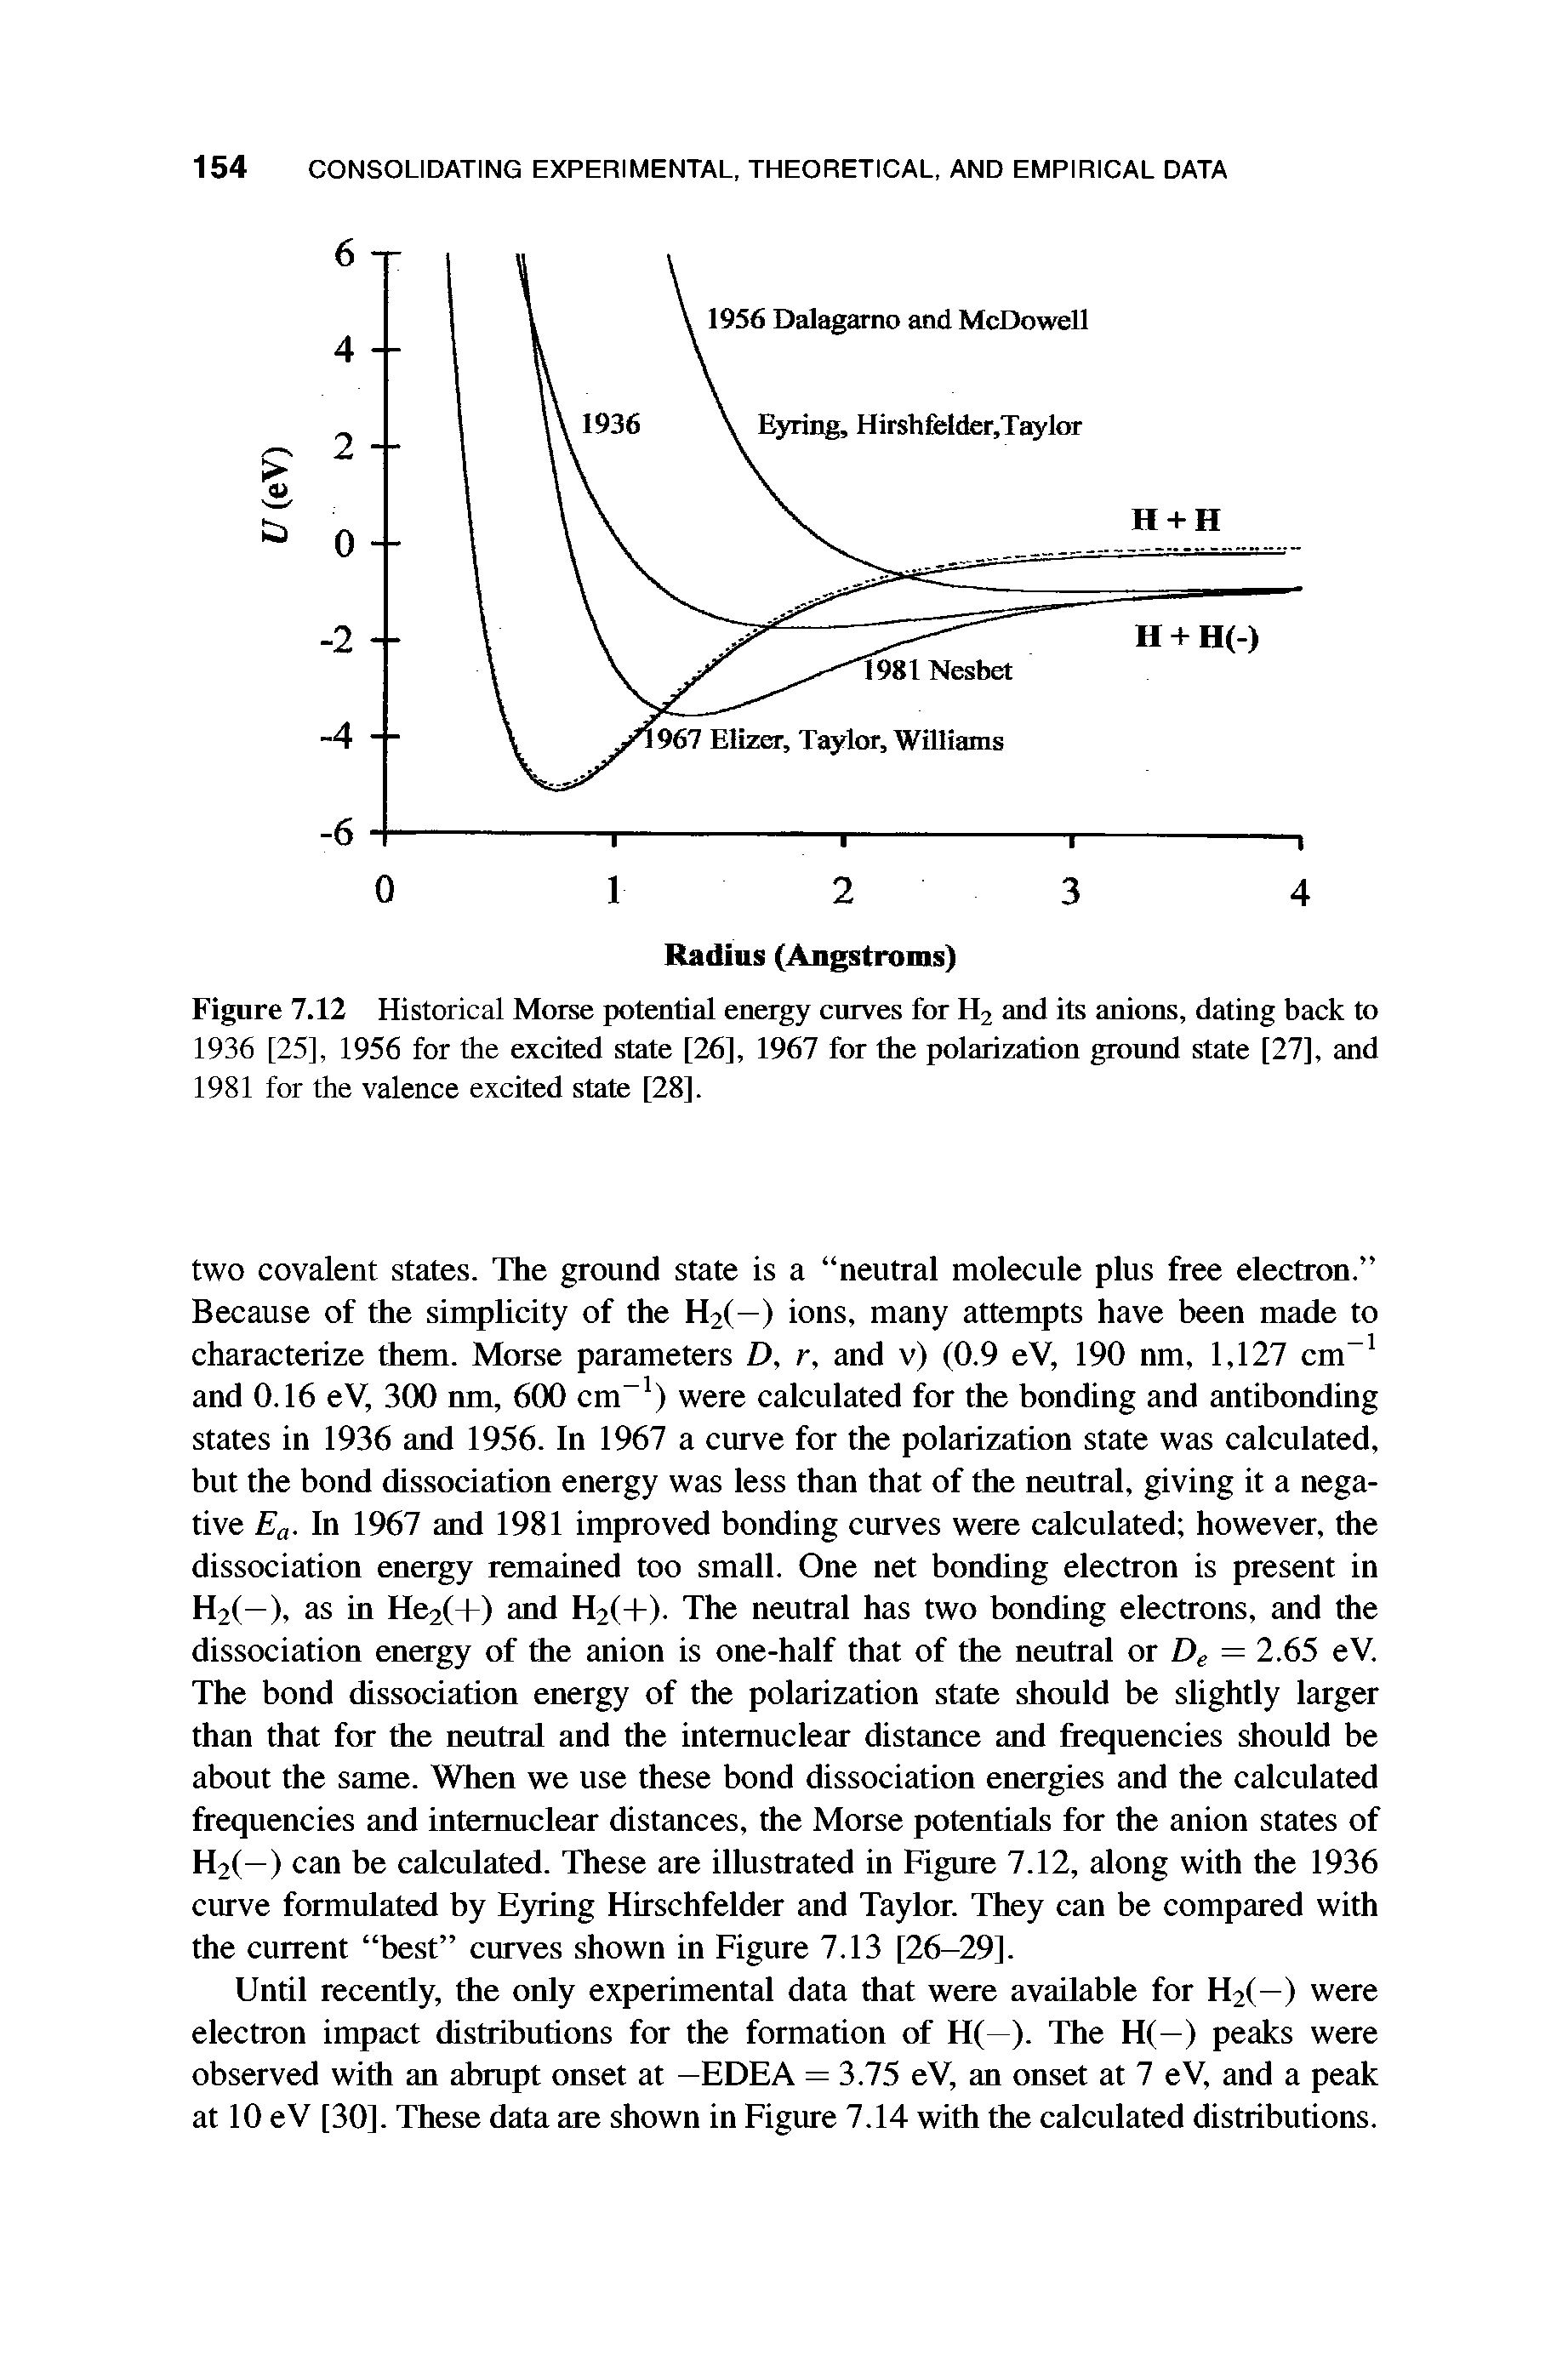 Figure 7.12 Historical Morse potential energy curves for H2 and its anions, dating back to 1936 [25], 1956 for the excited state [26], 1967 for the polarization ground state [27], and 1981 for the valence excited state [28].